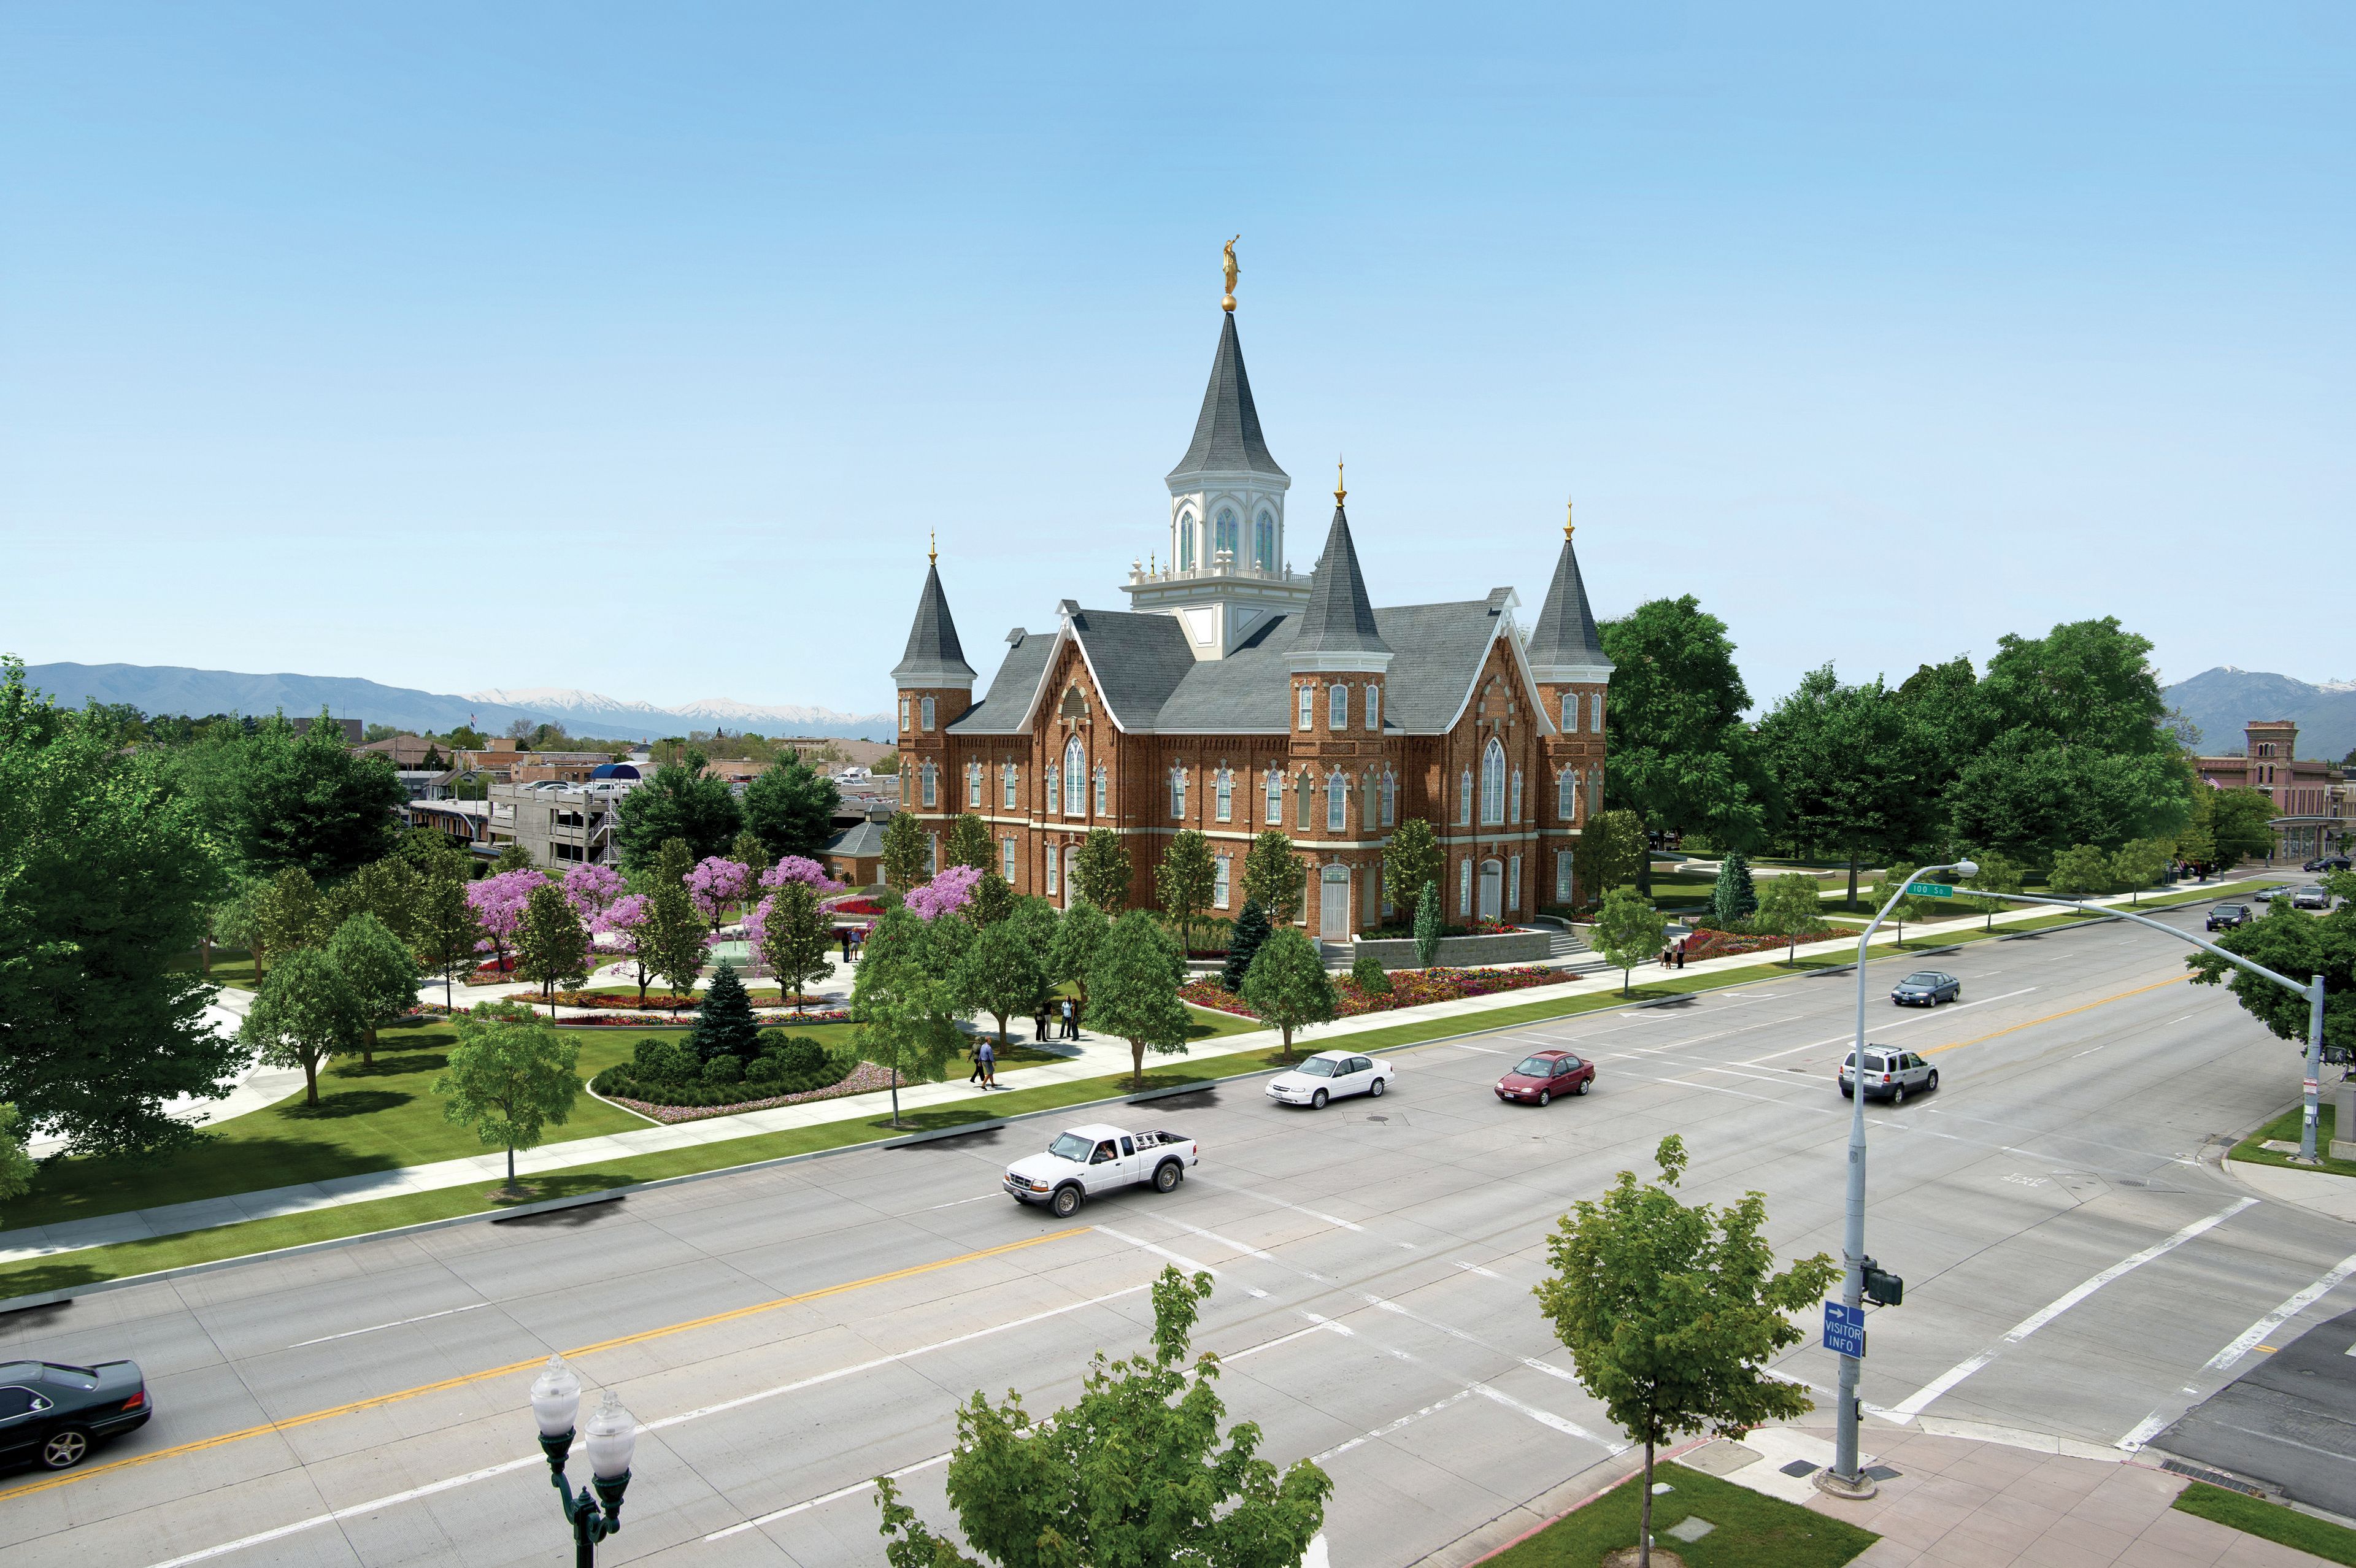 An artist’s rendition of the Provo City Center Temple, including scenery.